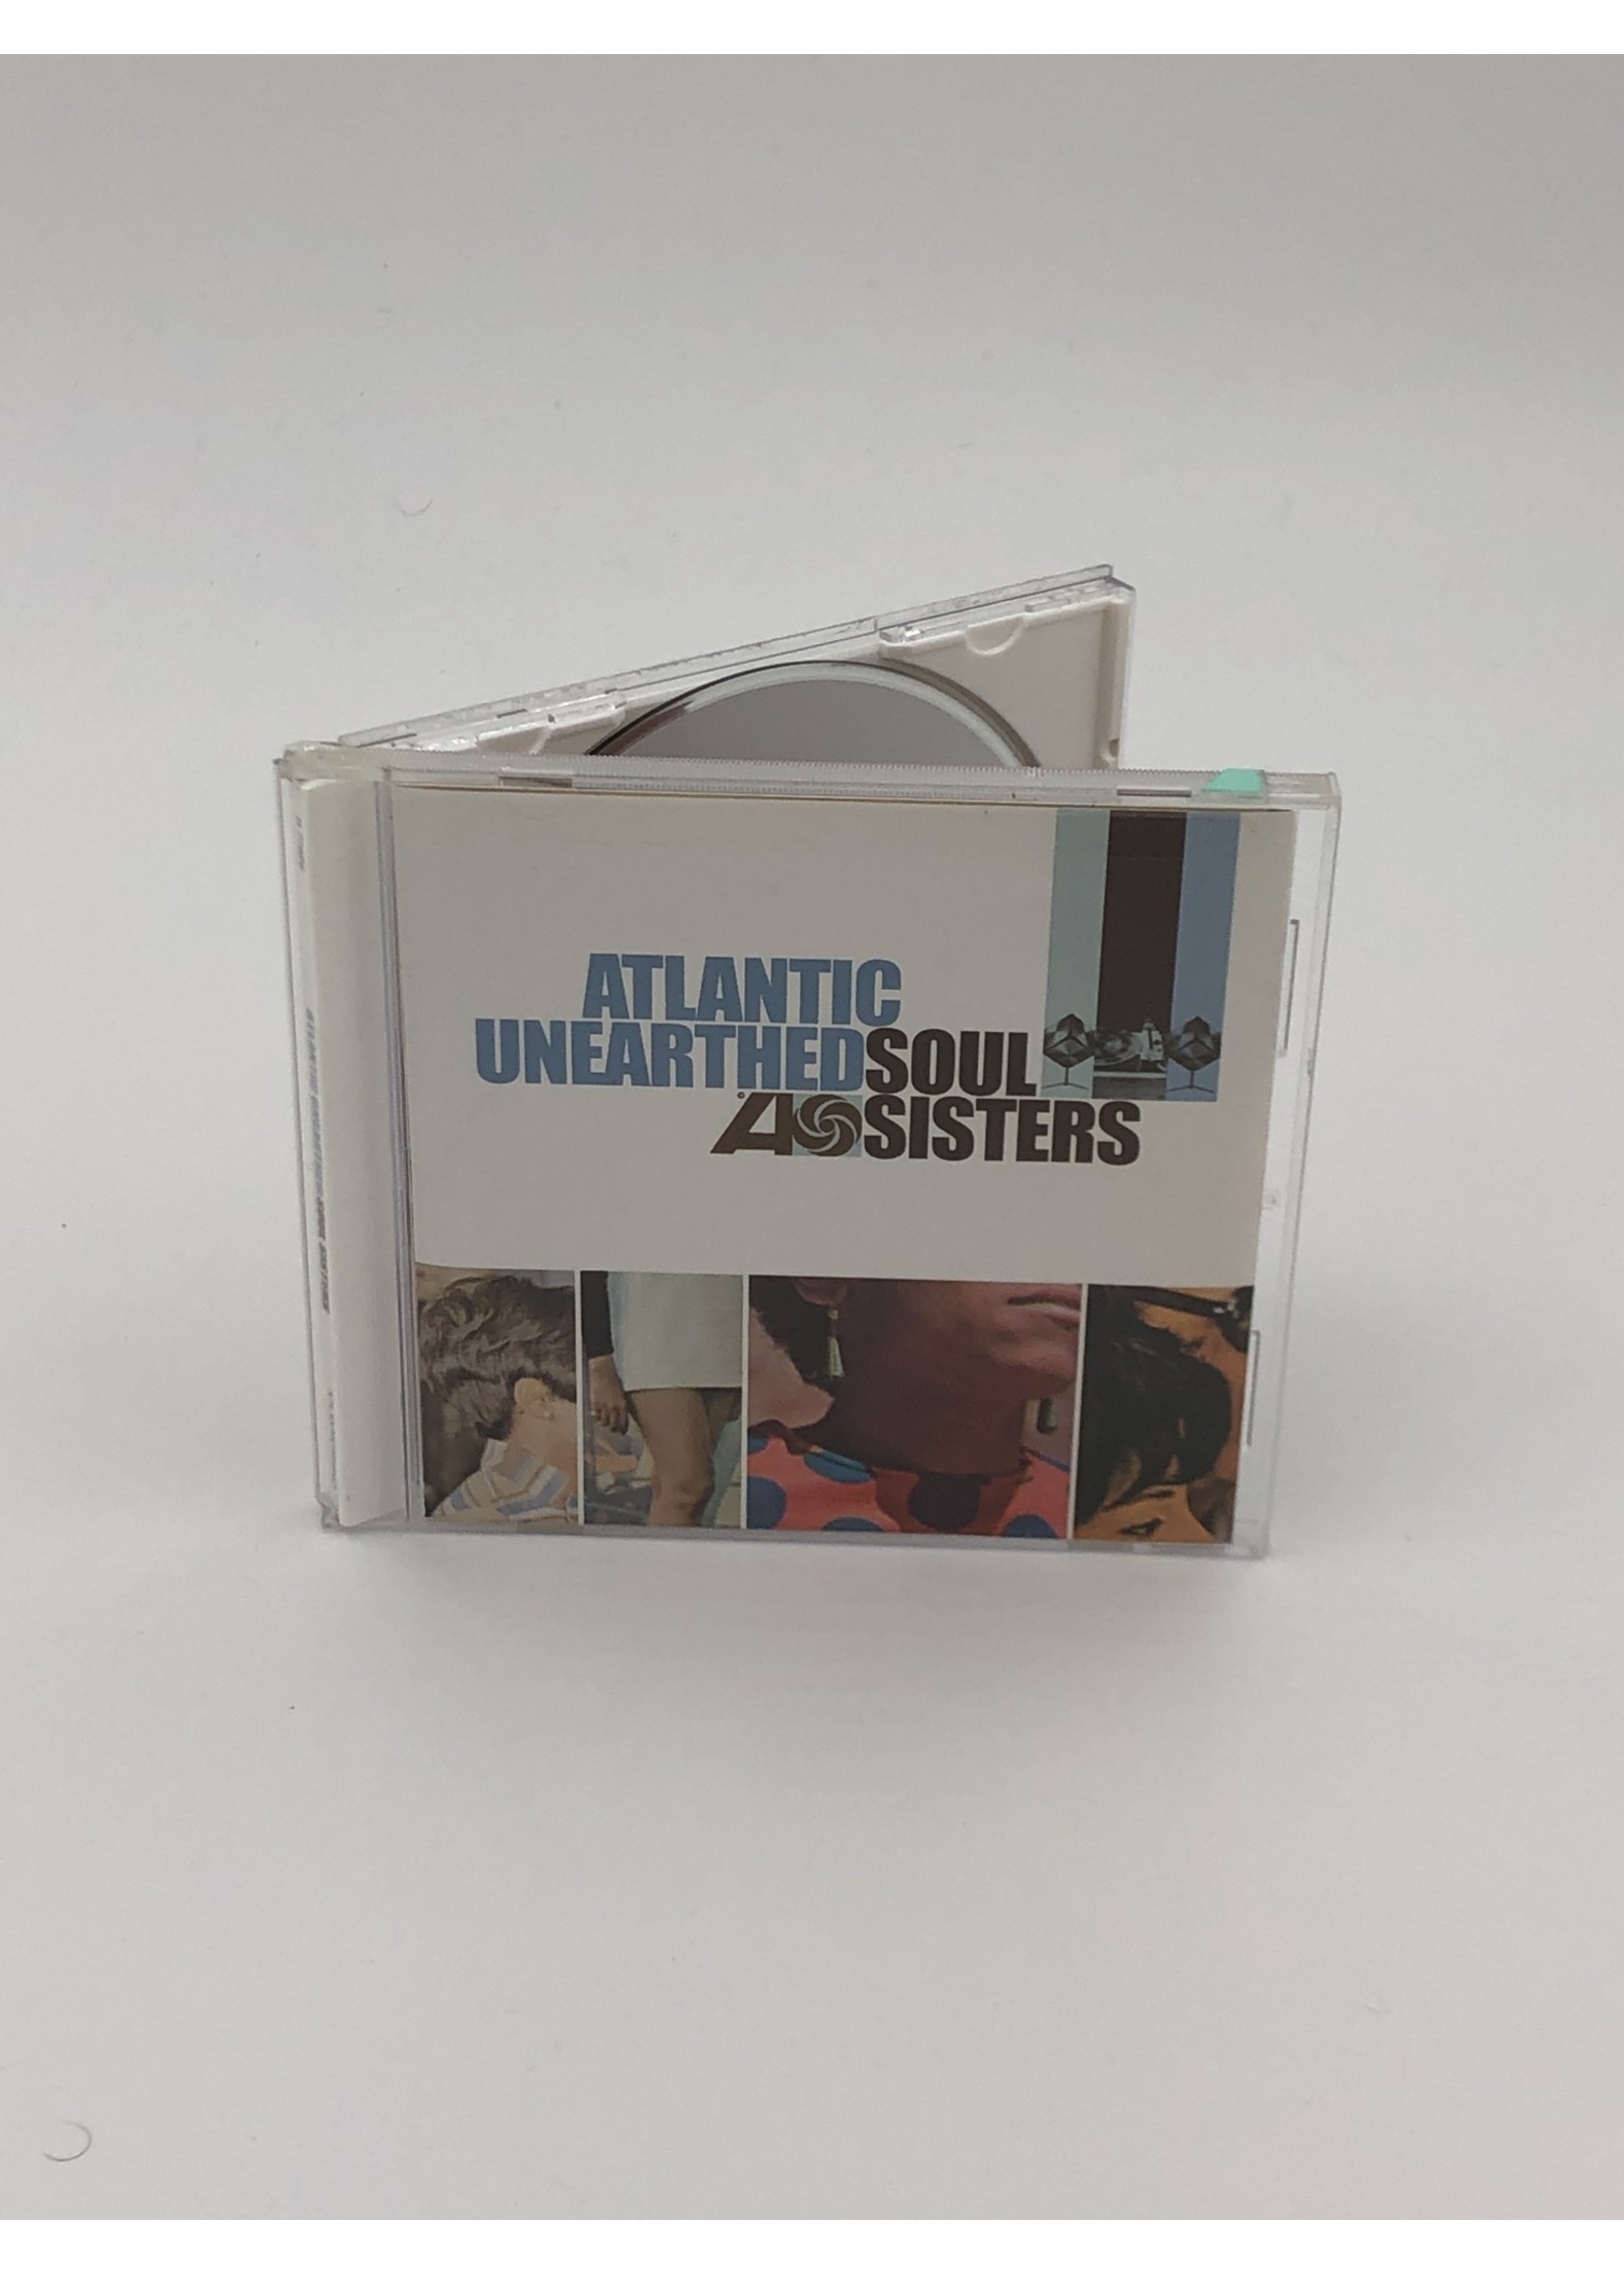 CD Atlantic Unearthed Soul Sisters CD